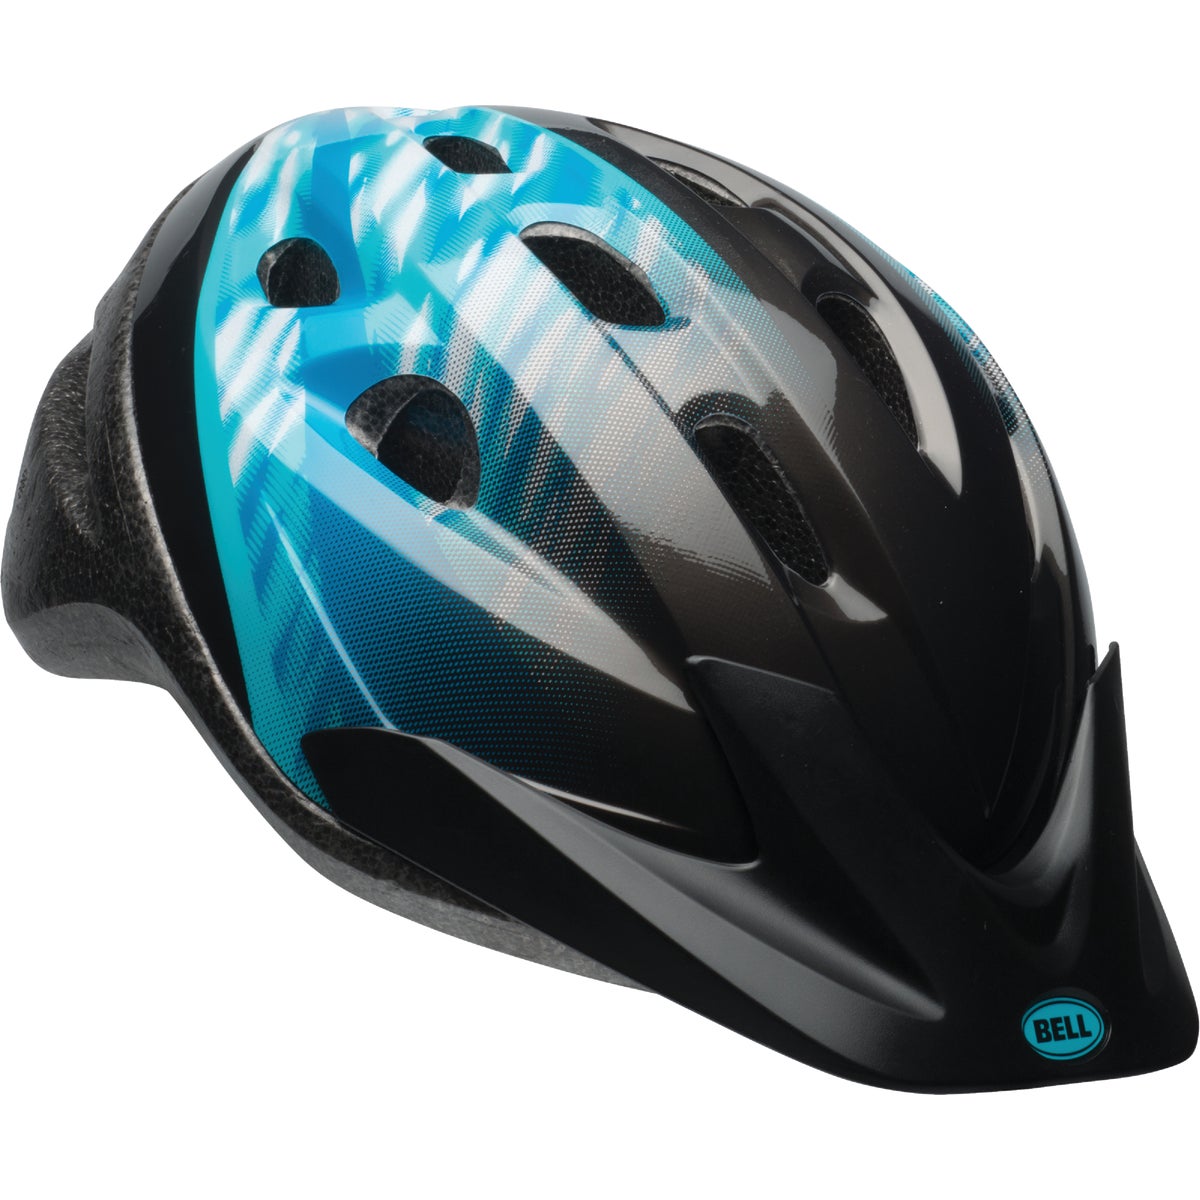 Item 809292, Sporty shape bicycle helmet offers aggressive styling.